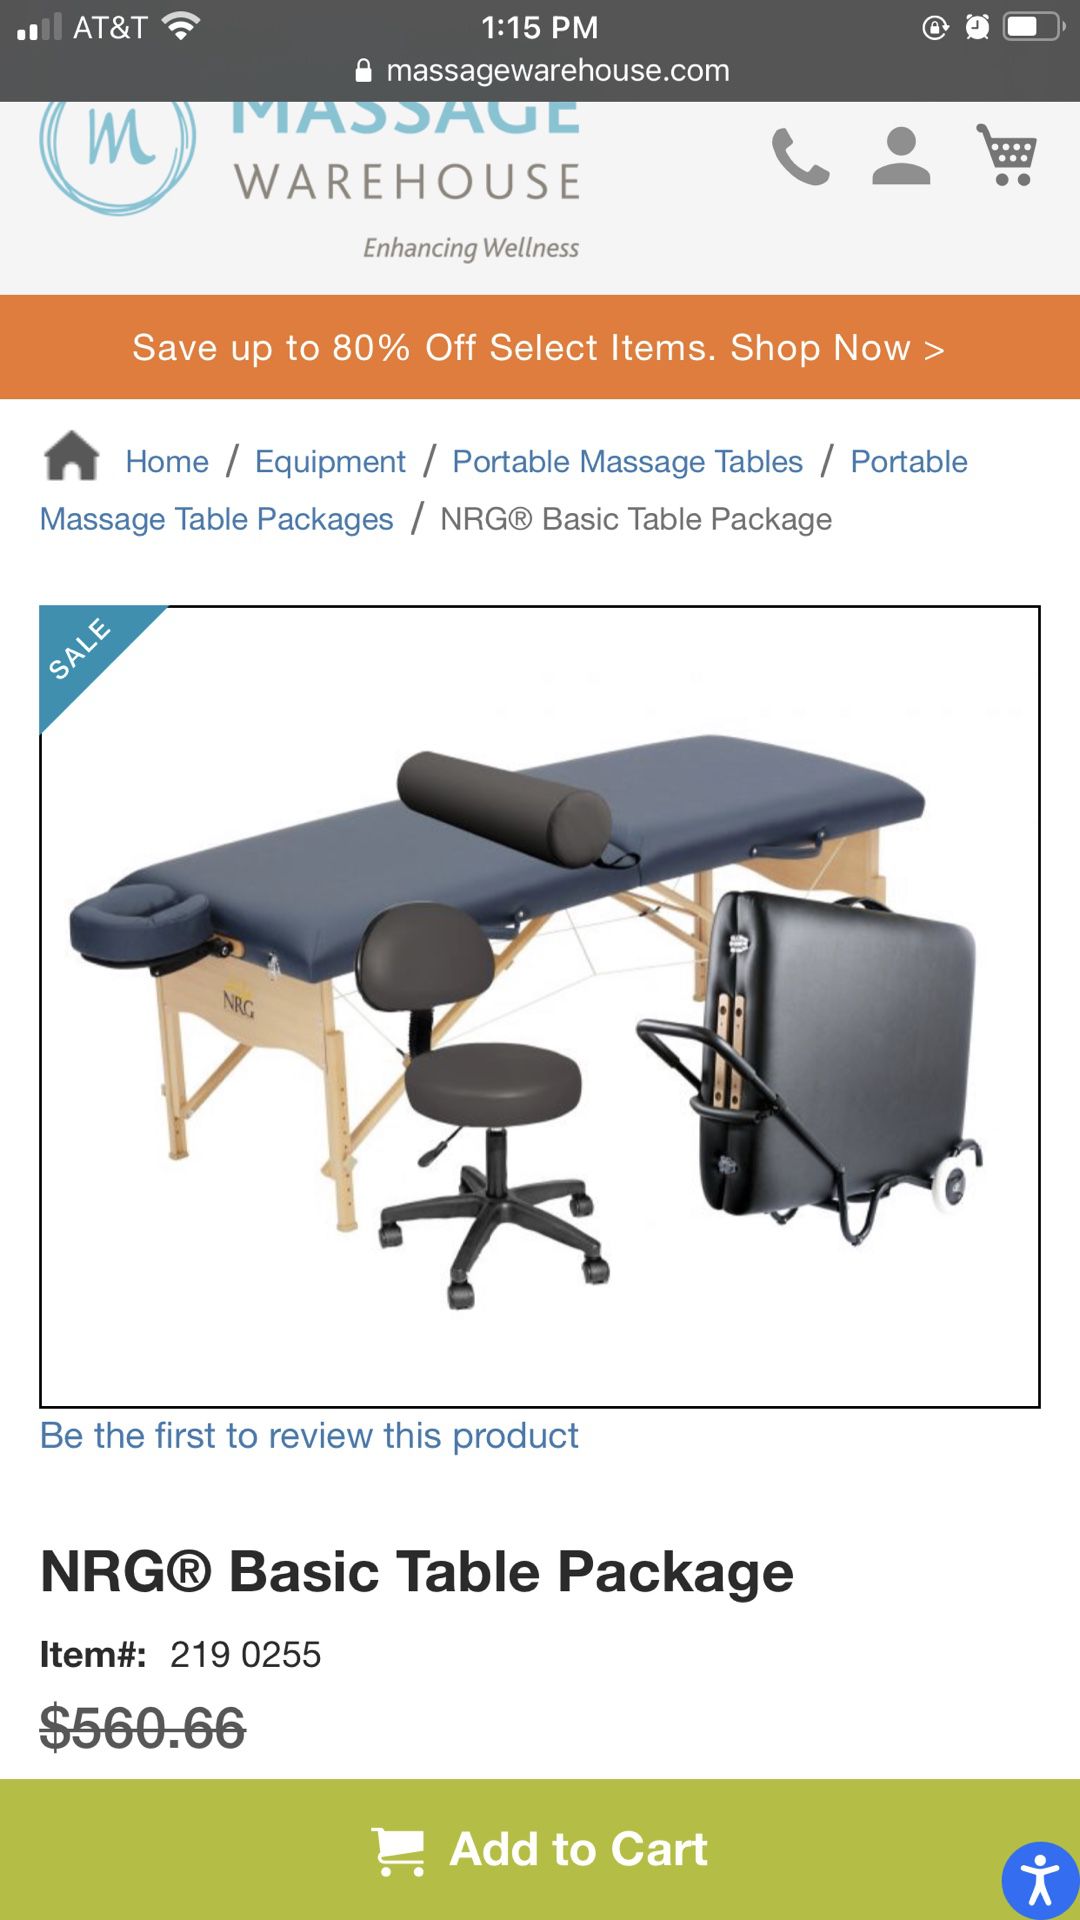 NRG Basic Table Package (Massage Table)